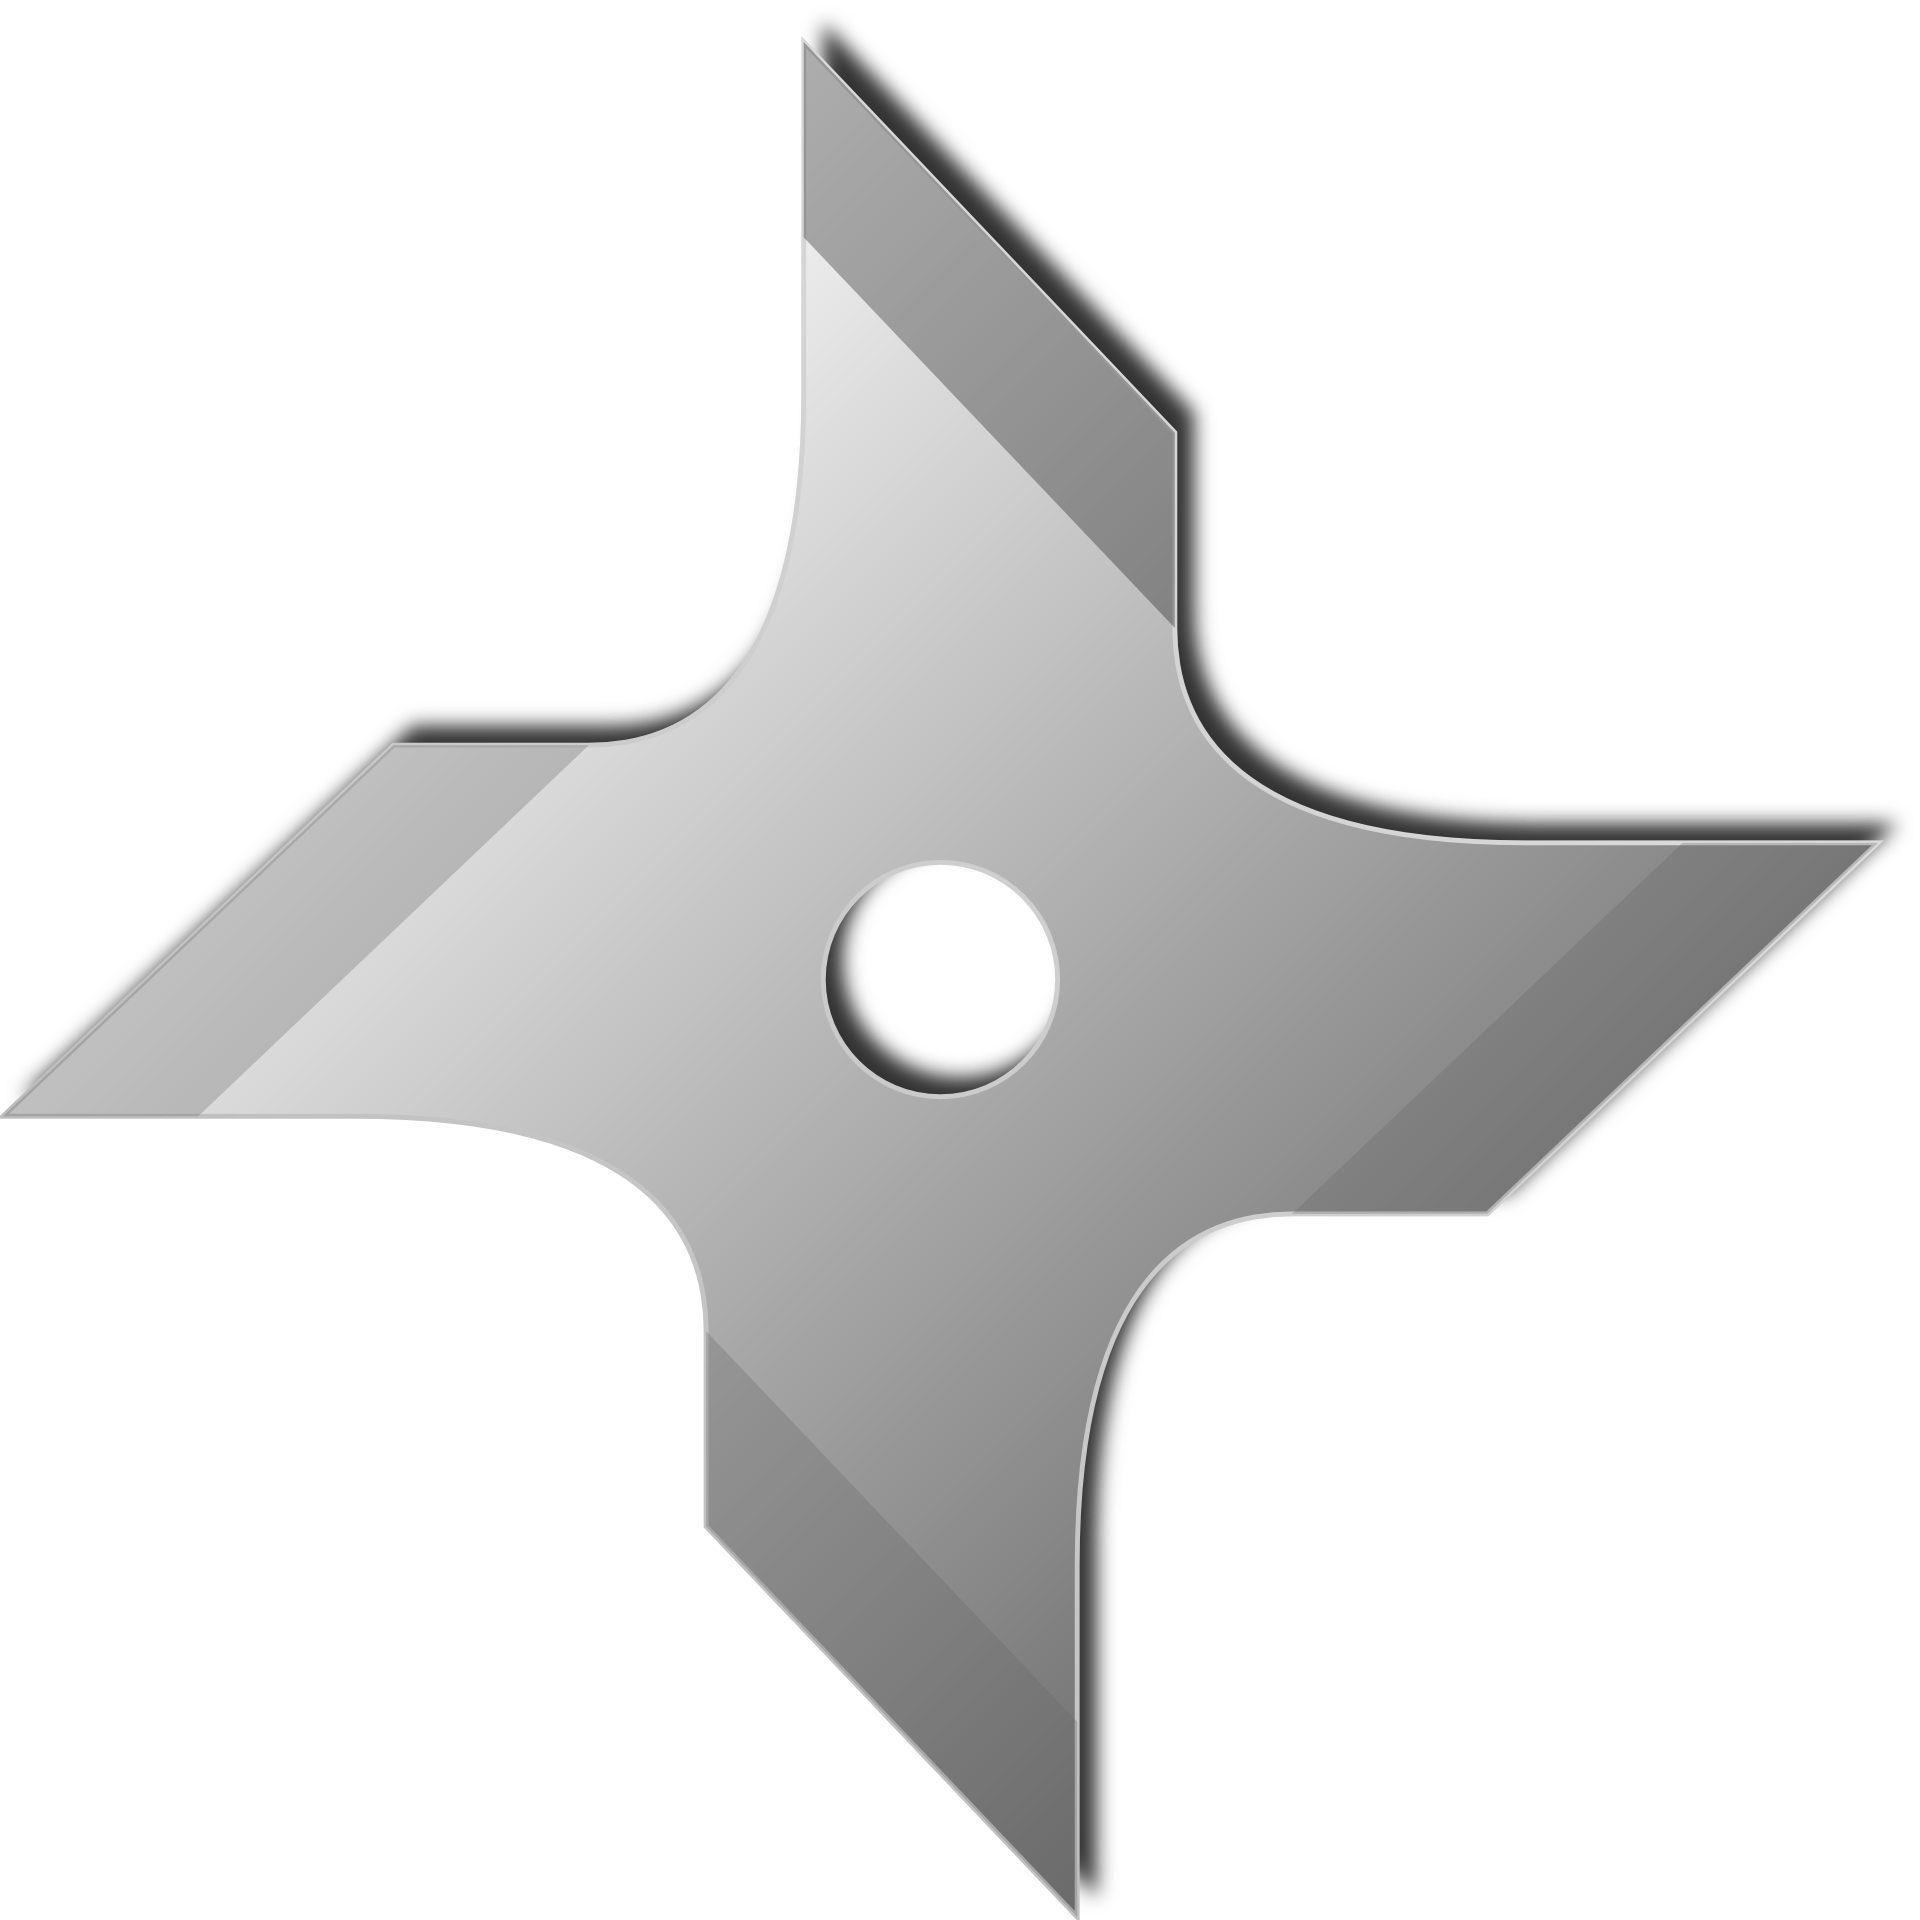 Popular Types of Shuriken and Their Uses!